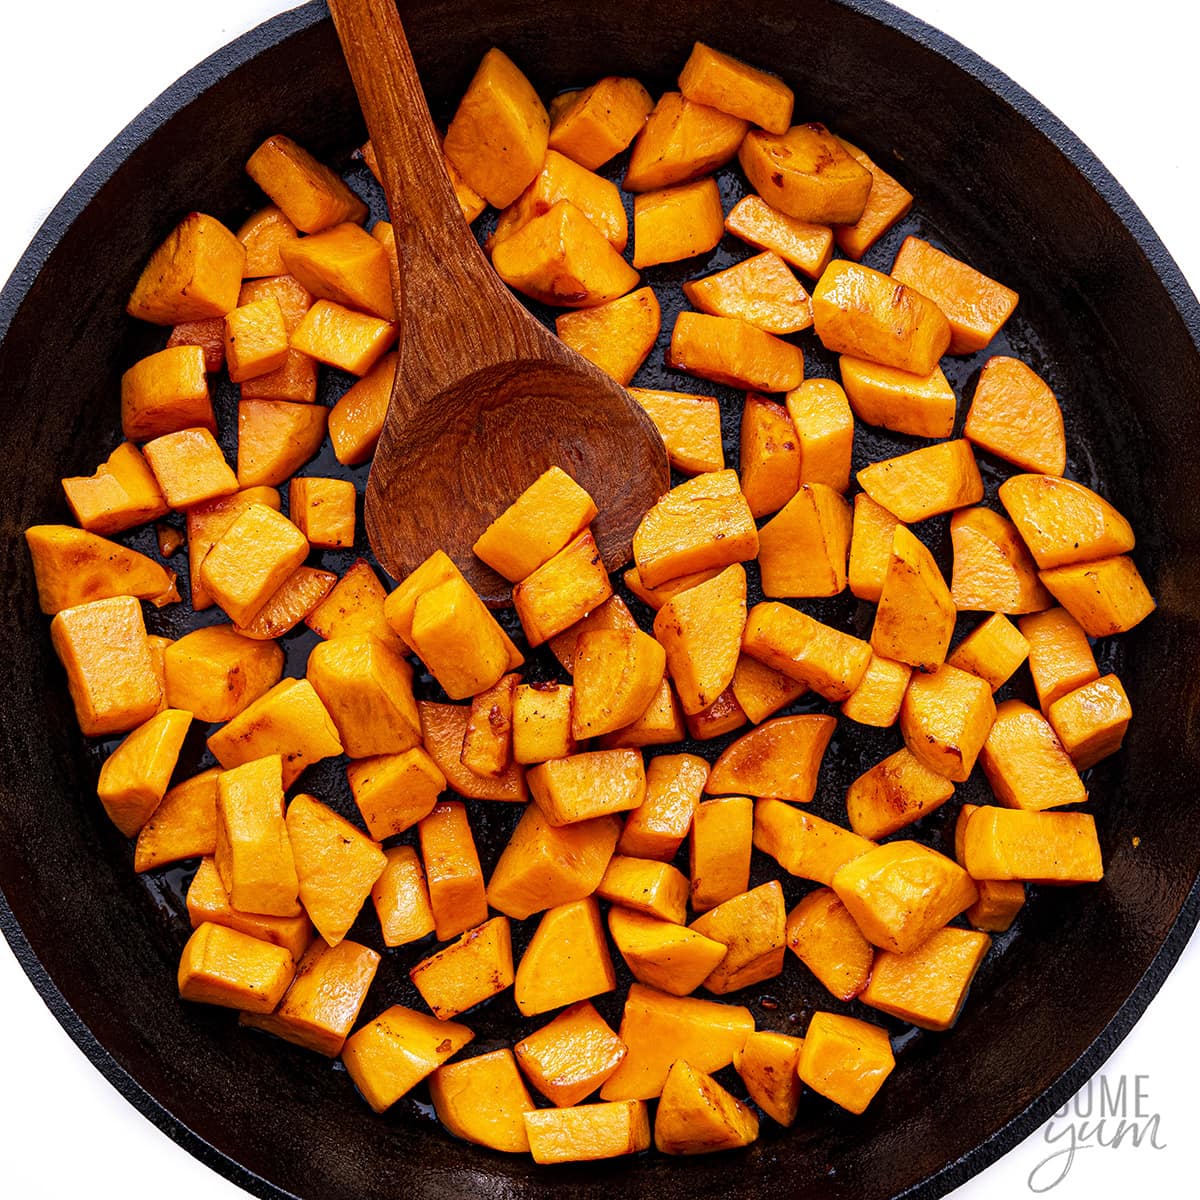 Sweet potatoes in a skillet with a wooden spoon.